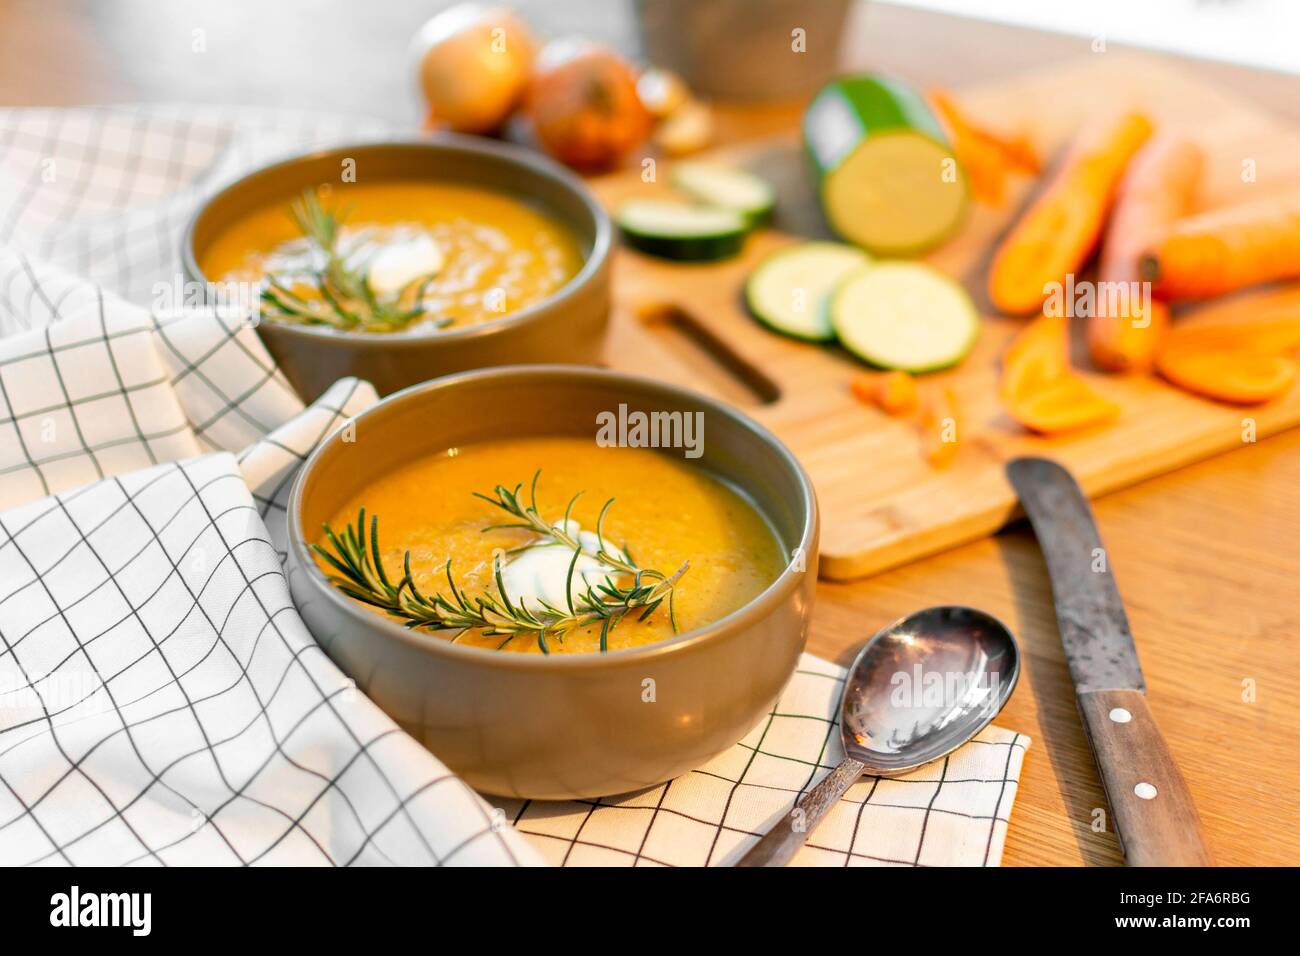 A nice homecooked meal containing a fresh vegetable soup with carrots and zucchini and onions served on an old wood table with a lot of garnish. Stock Photo